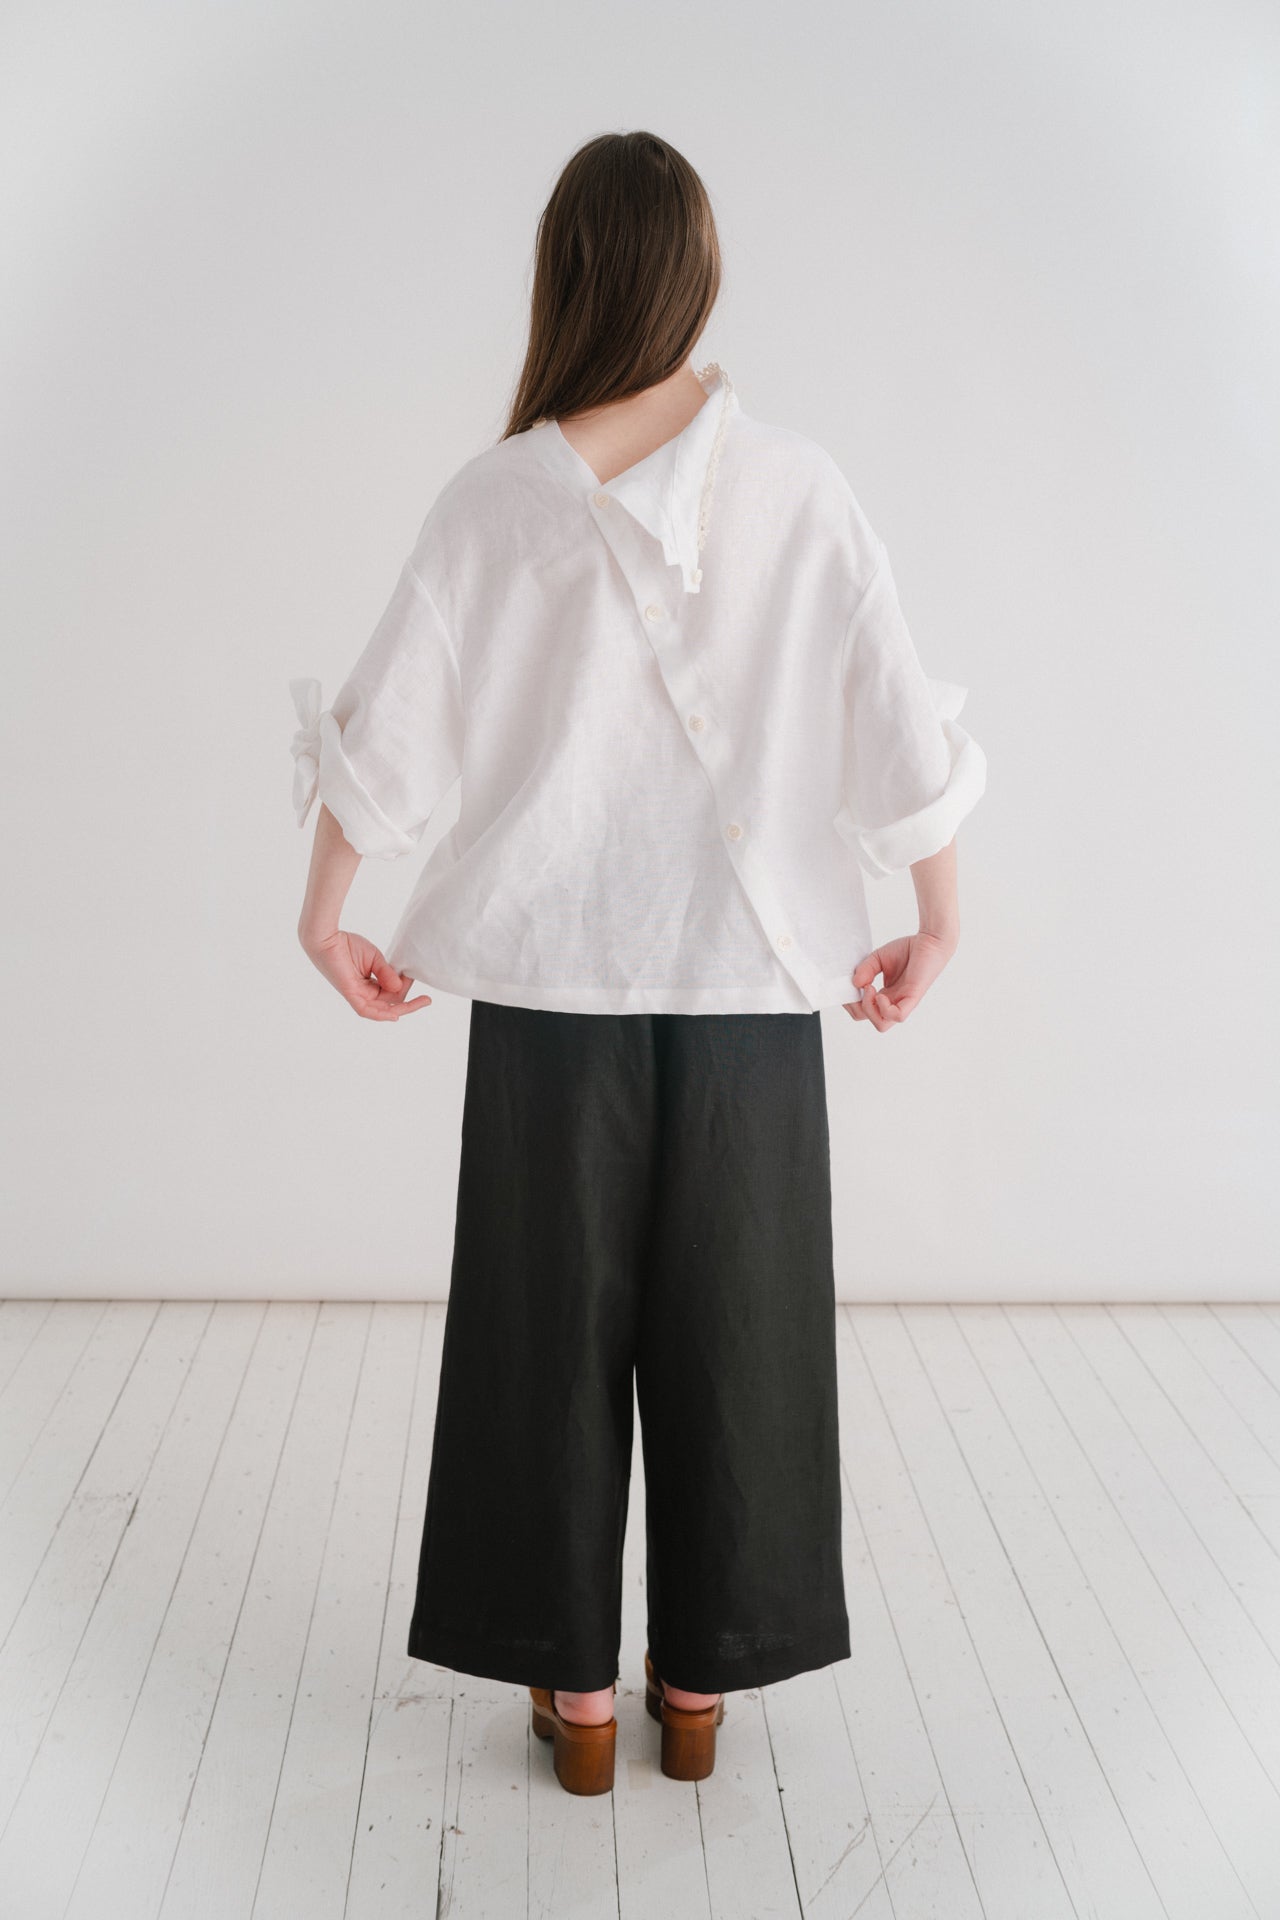 VIVIENNE | IRISH CROCHET | This is a pretty special one- the shirt you will keep forever and pass on to your kin. Created with the purest white linen, the asymetric button placket and bows on the sleeves give it a fun and modern edge, while the addition o